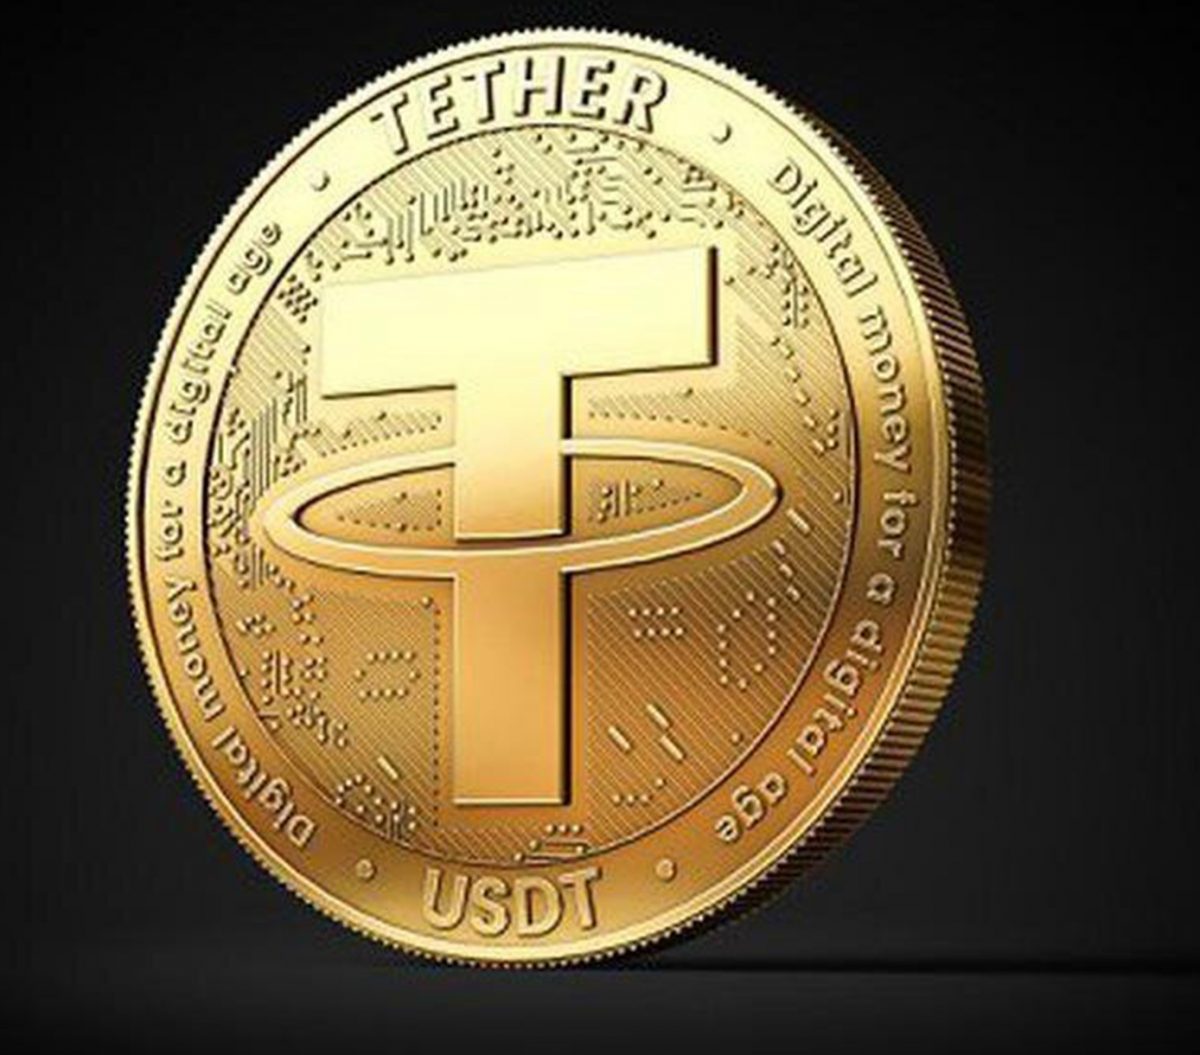 cryptocurrency thats worth 20 cents